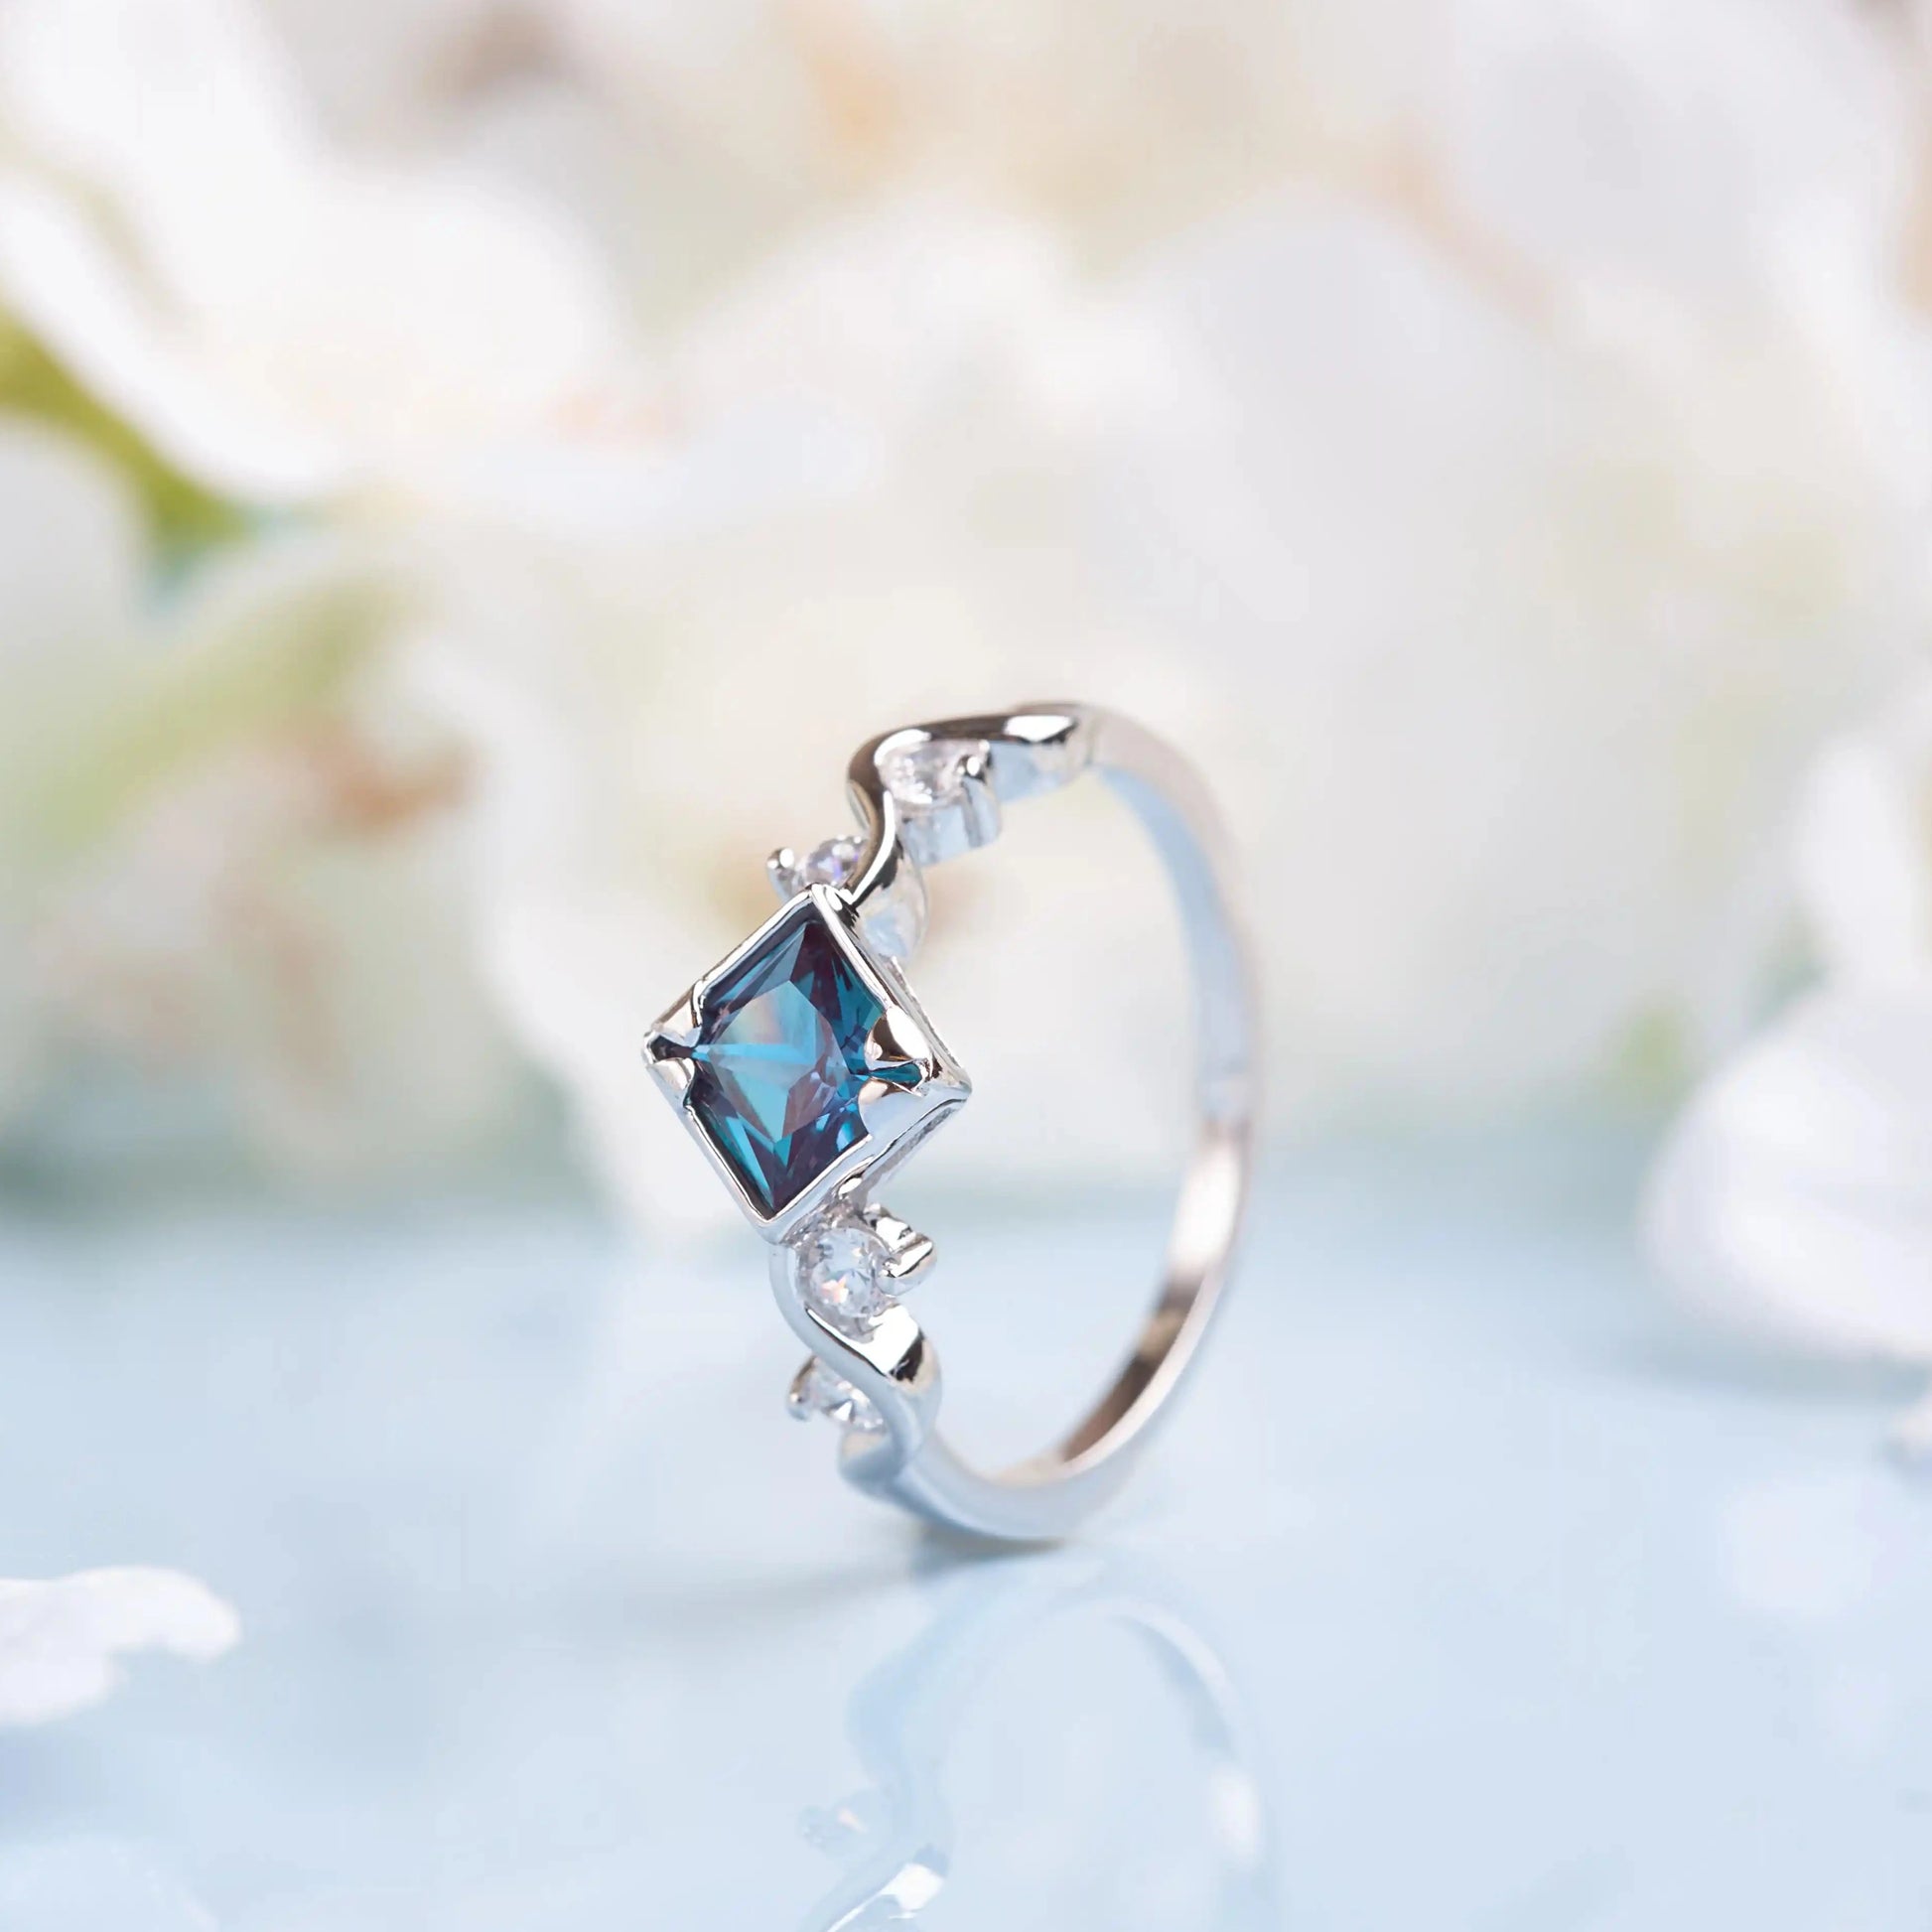 Princess Cut Alexandrite with a white gold